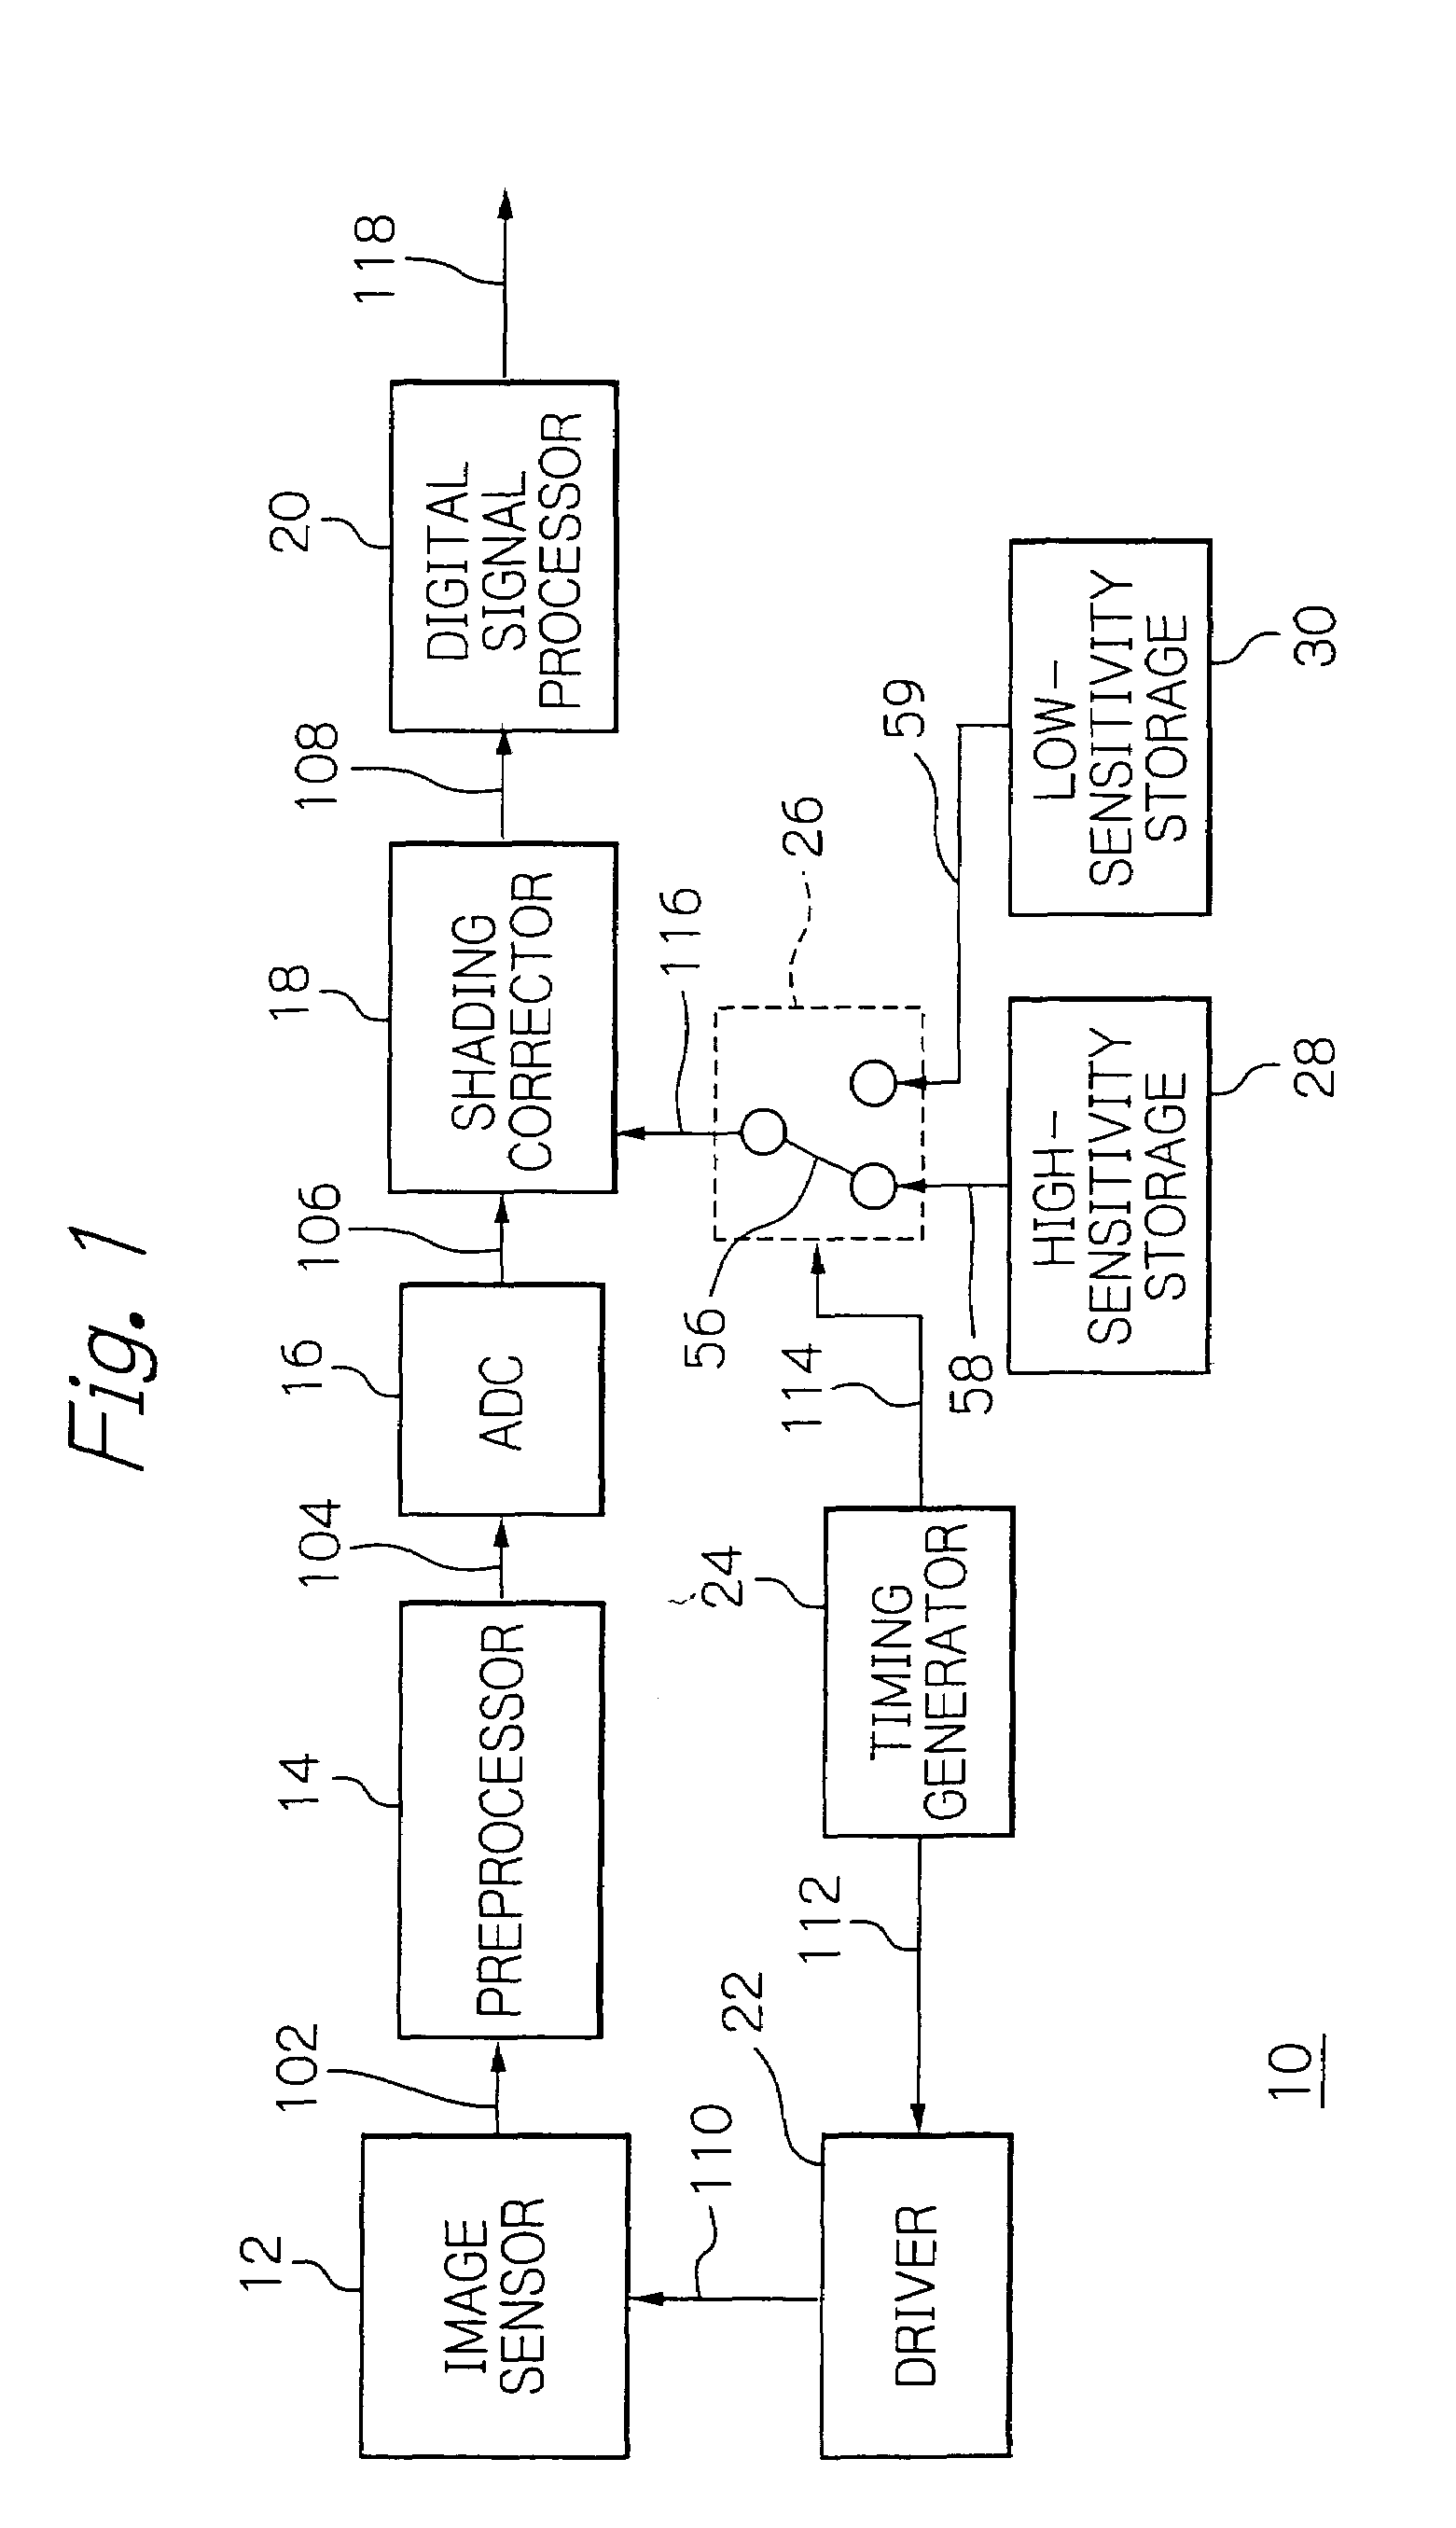 Apparatus for compensating for shading on a picture picked up by a solid-state image sensor over a broad dynamic range